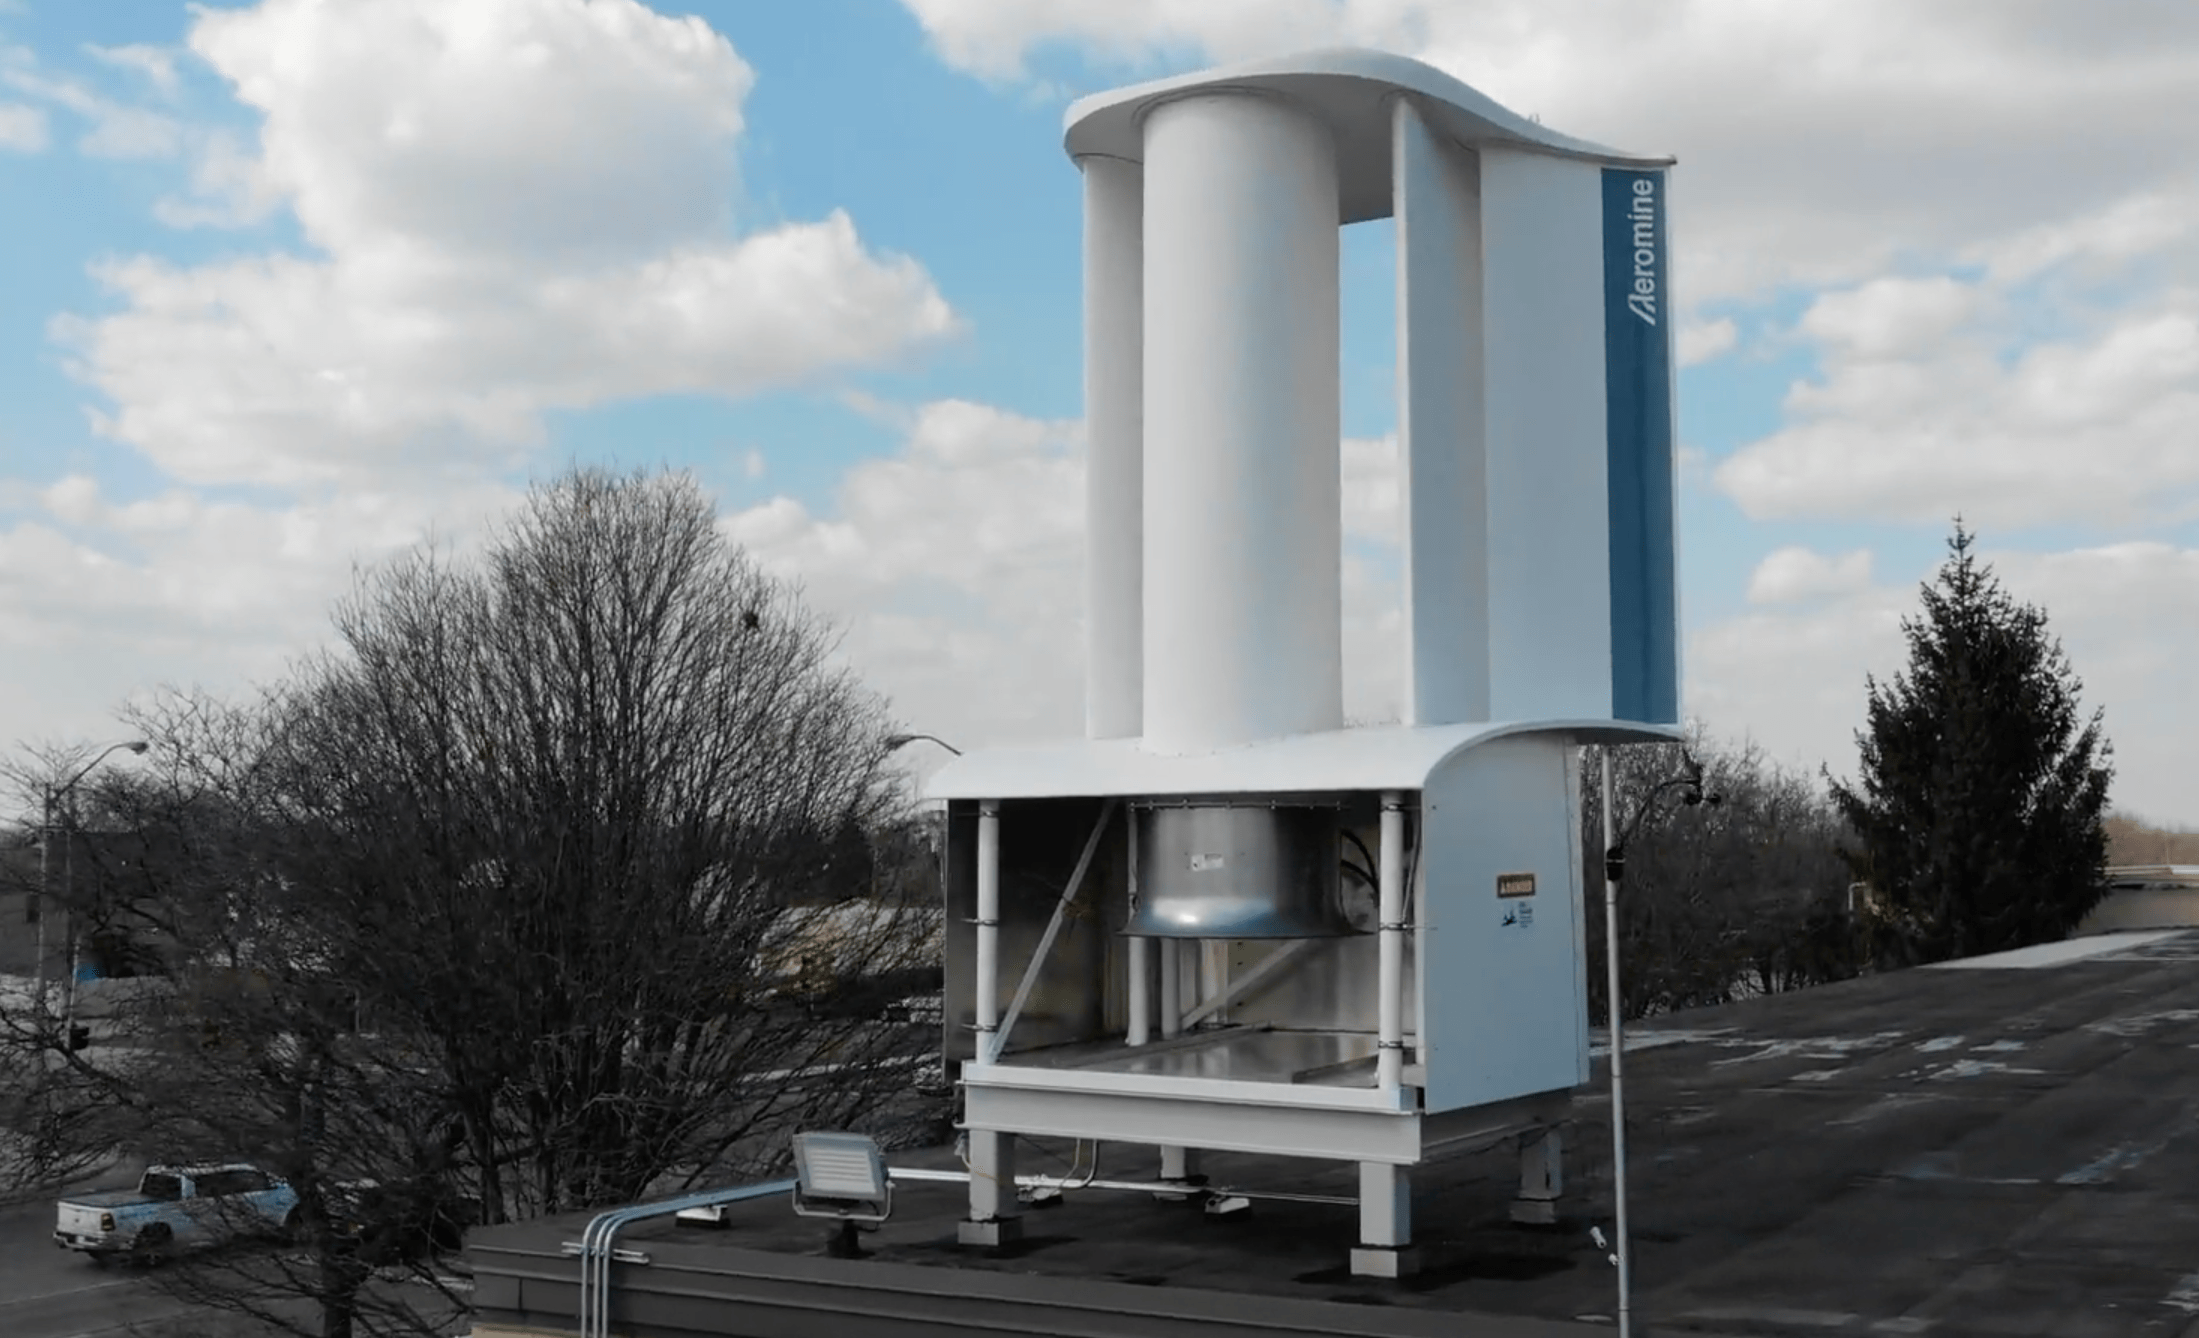 An Aeromine motionless wind generator on a commercial rooftop. Image: Aeromine Technologies